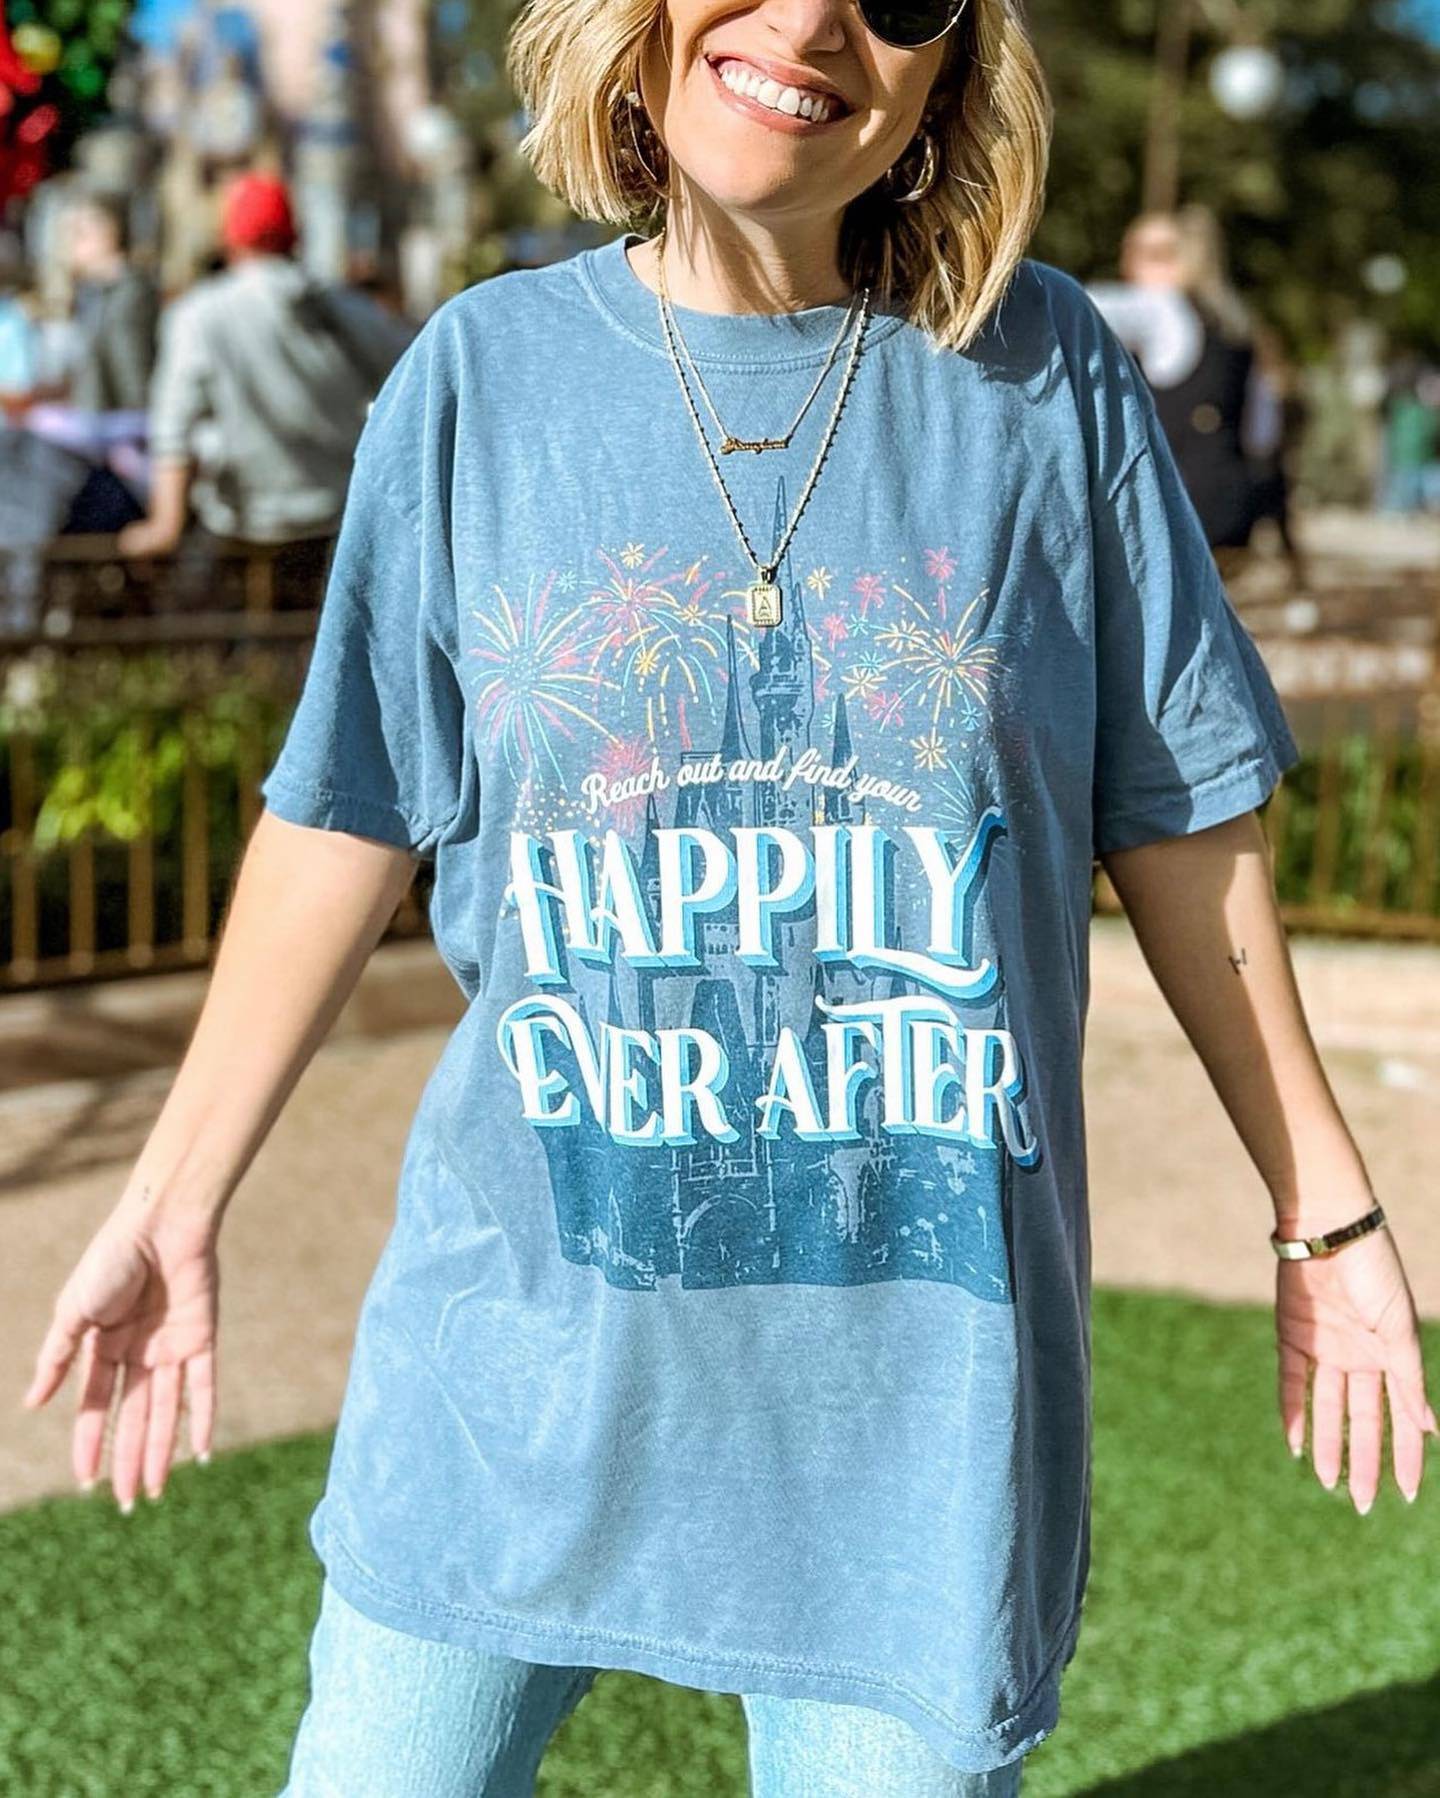 The Best Tees To Wear To The Return Of Happily Ever After At The Magic Kingdom